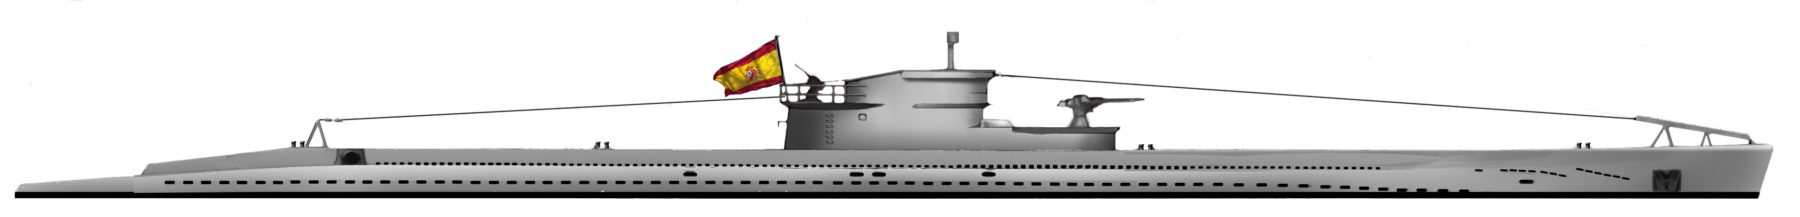 HD reconstruction D-type submarines